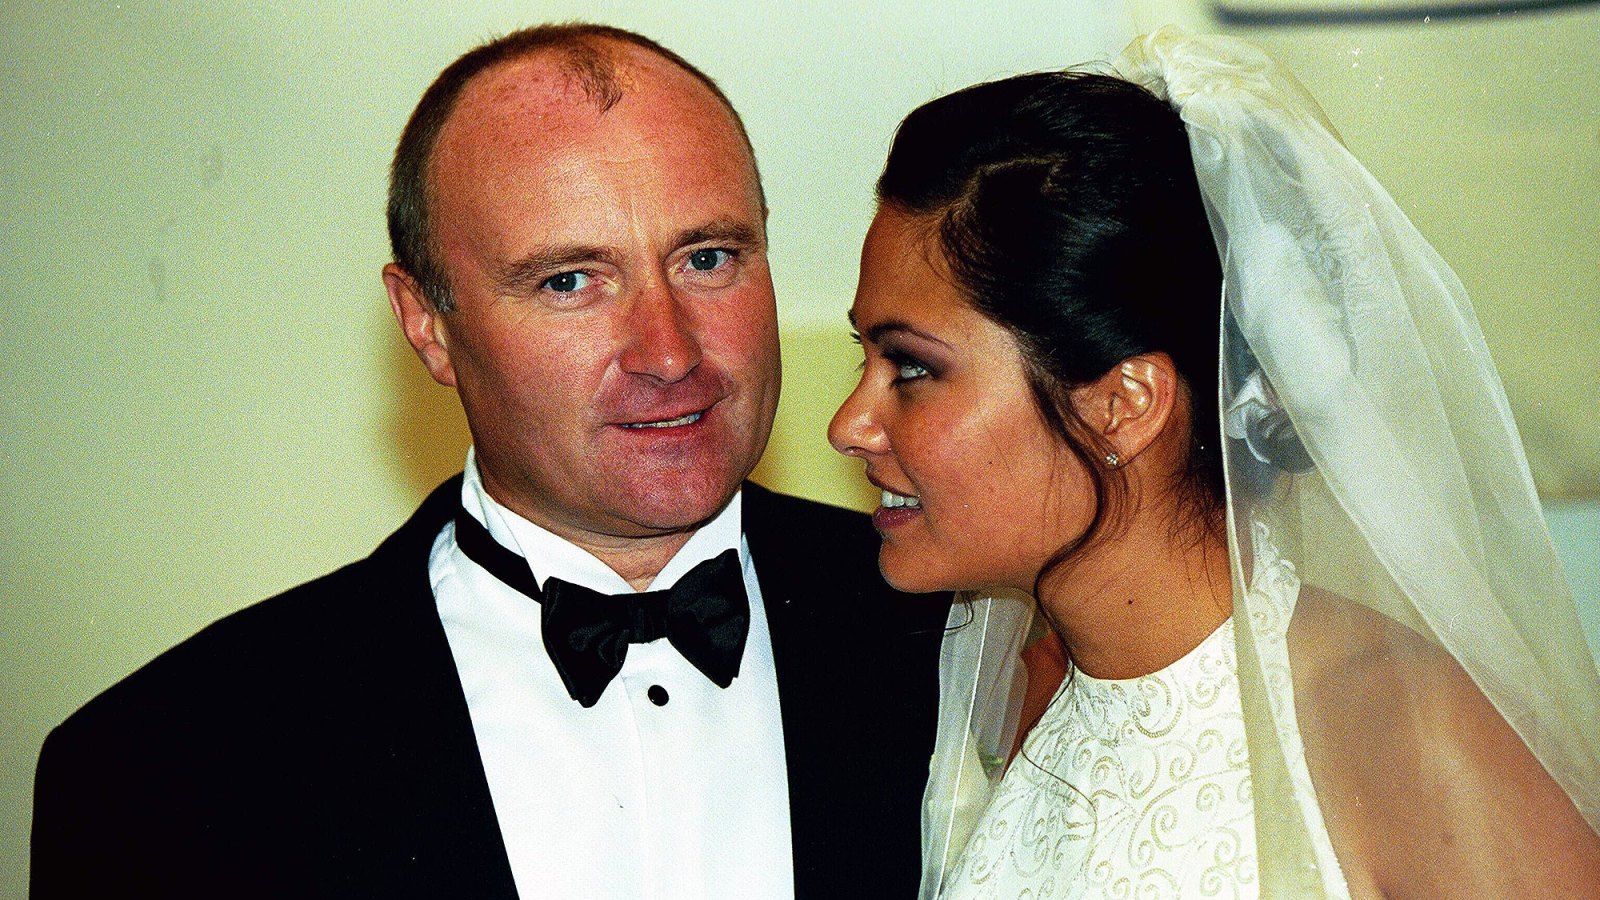 Phil Collins to Remarry His Third Ex-Wife, Orianne Cevey, After $46 Million Divorce